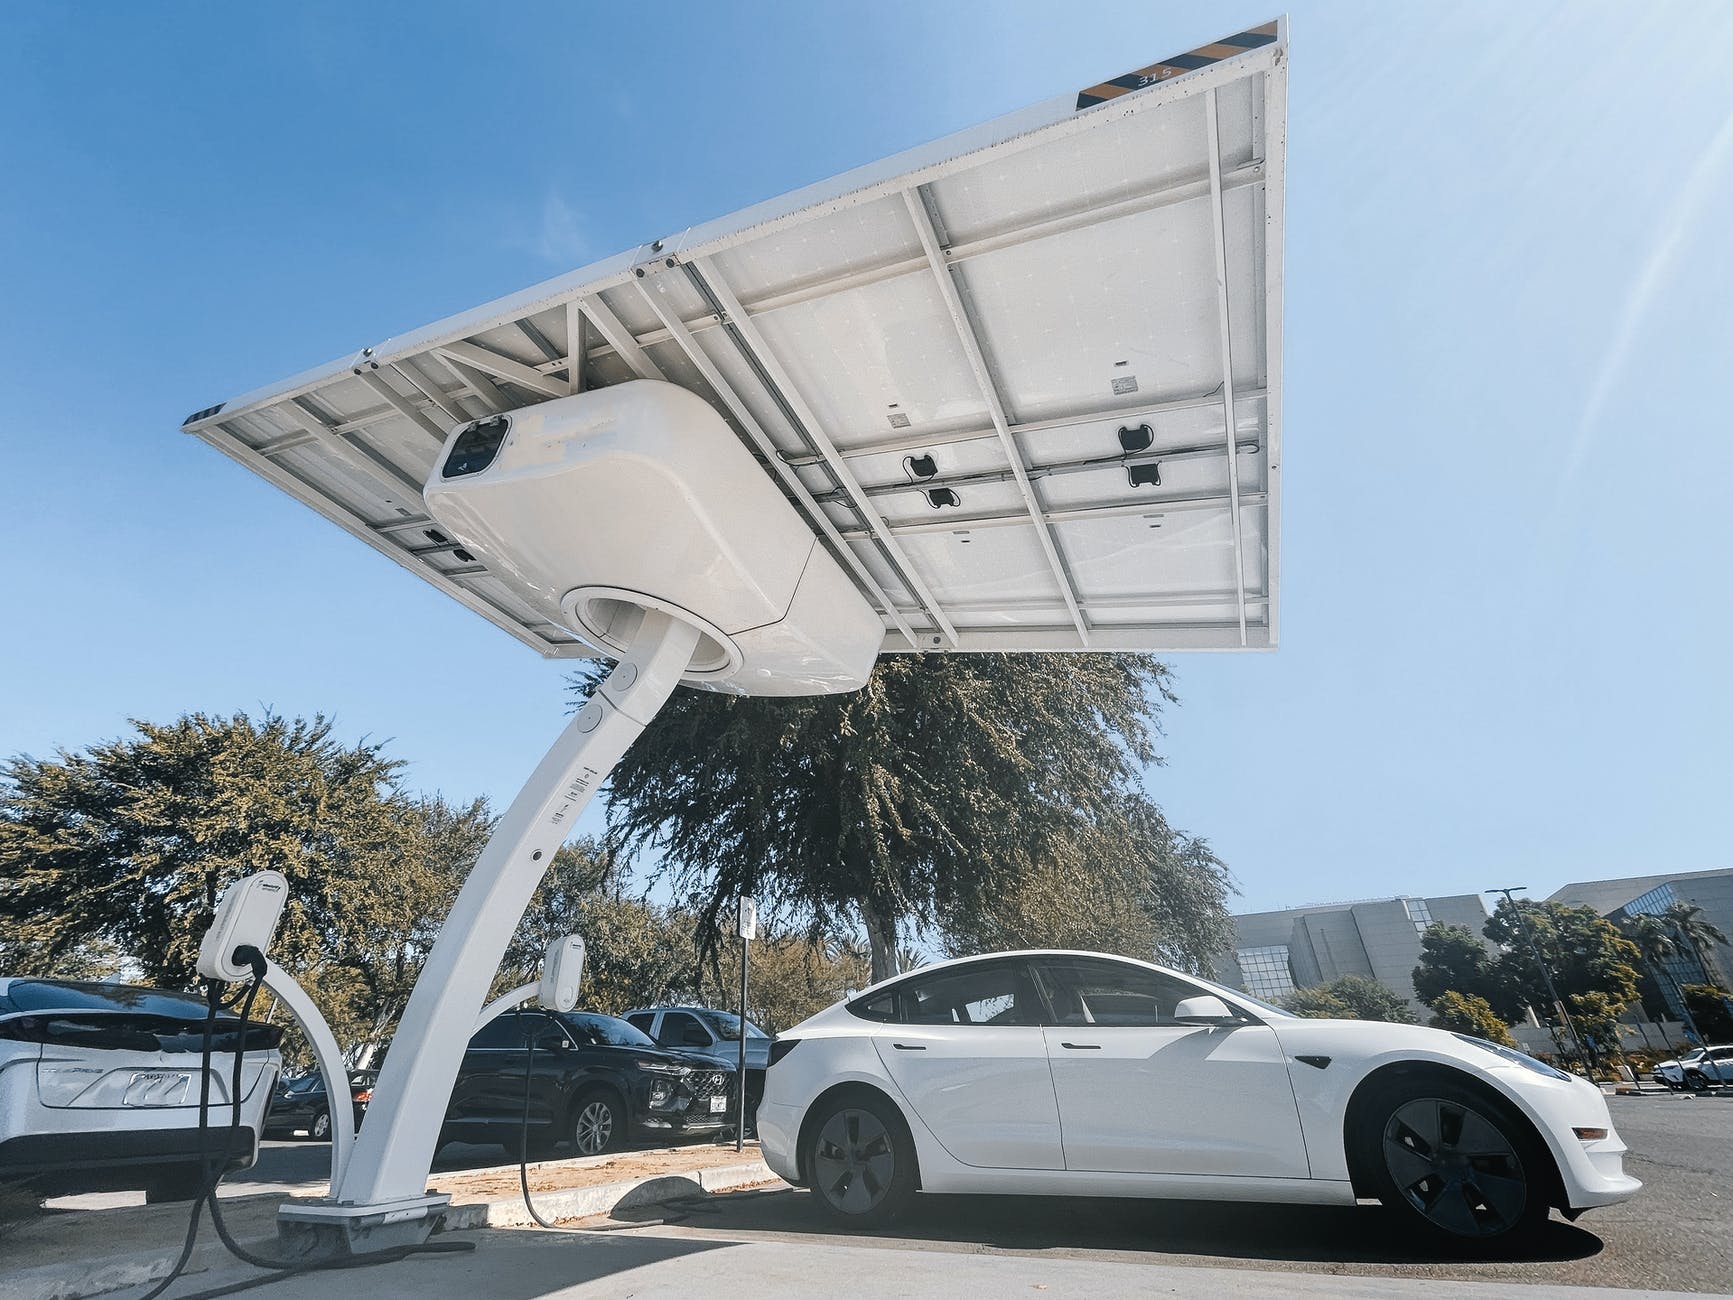 How will technology change in the next 20 years? Electric vehicles